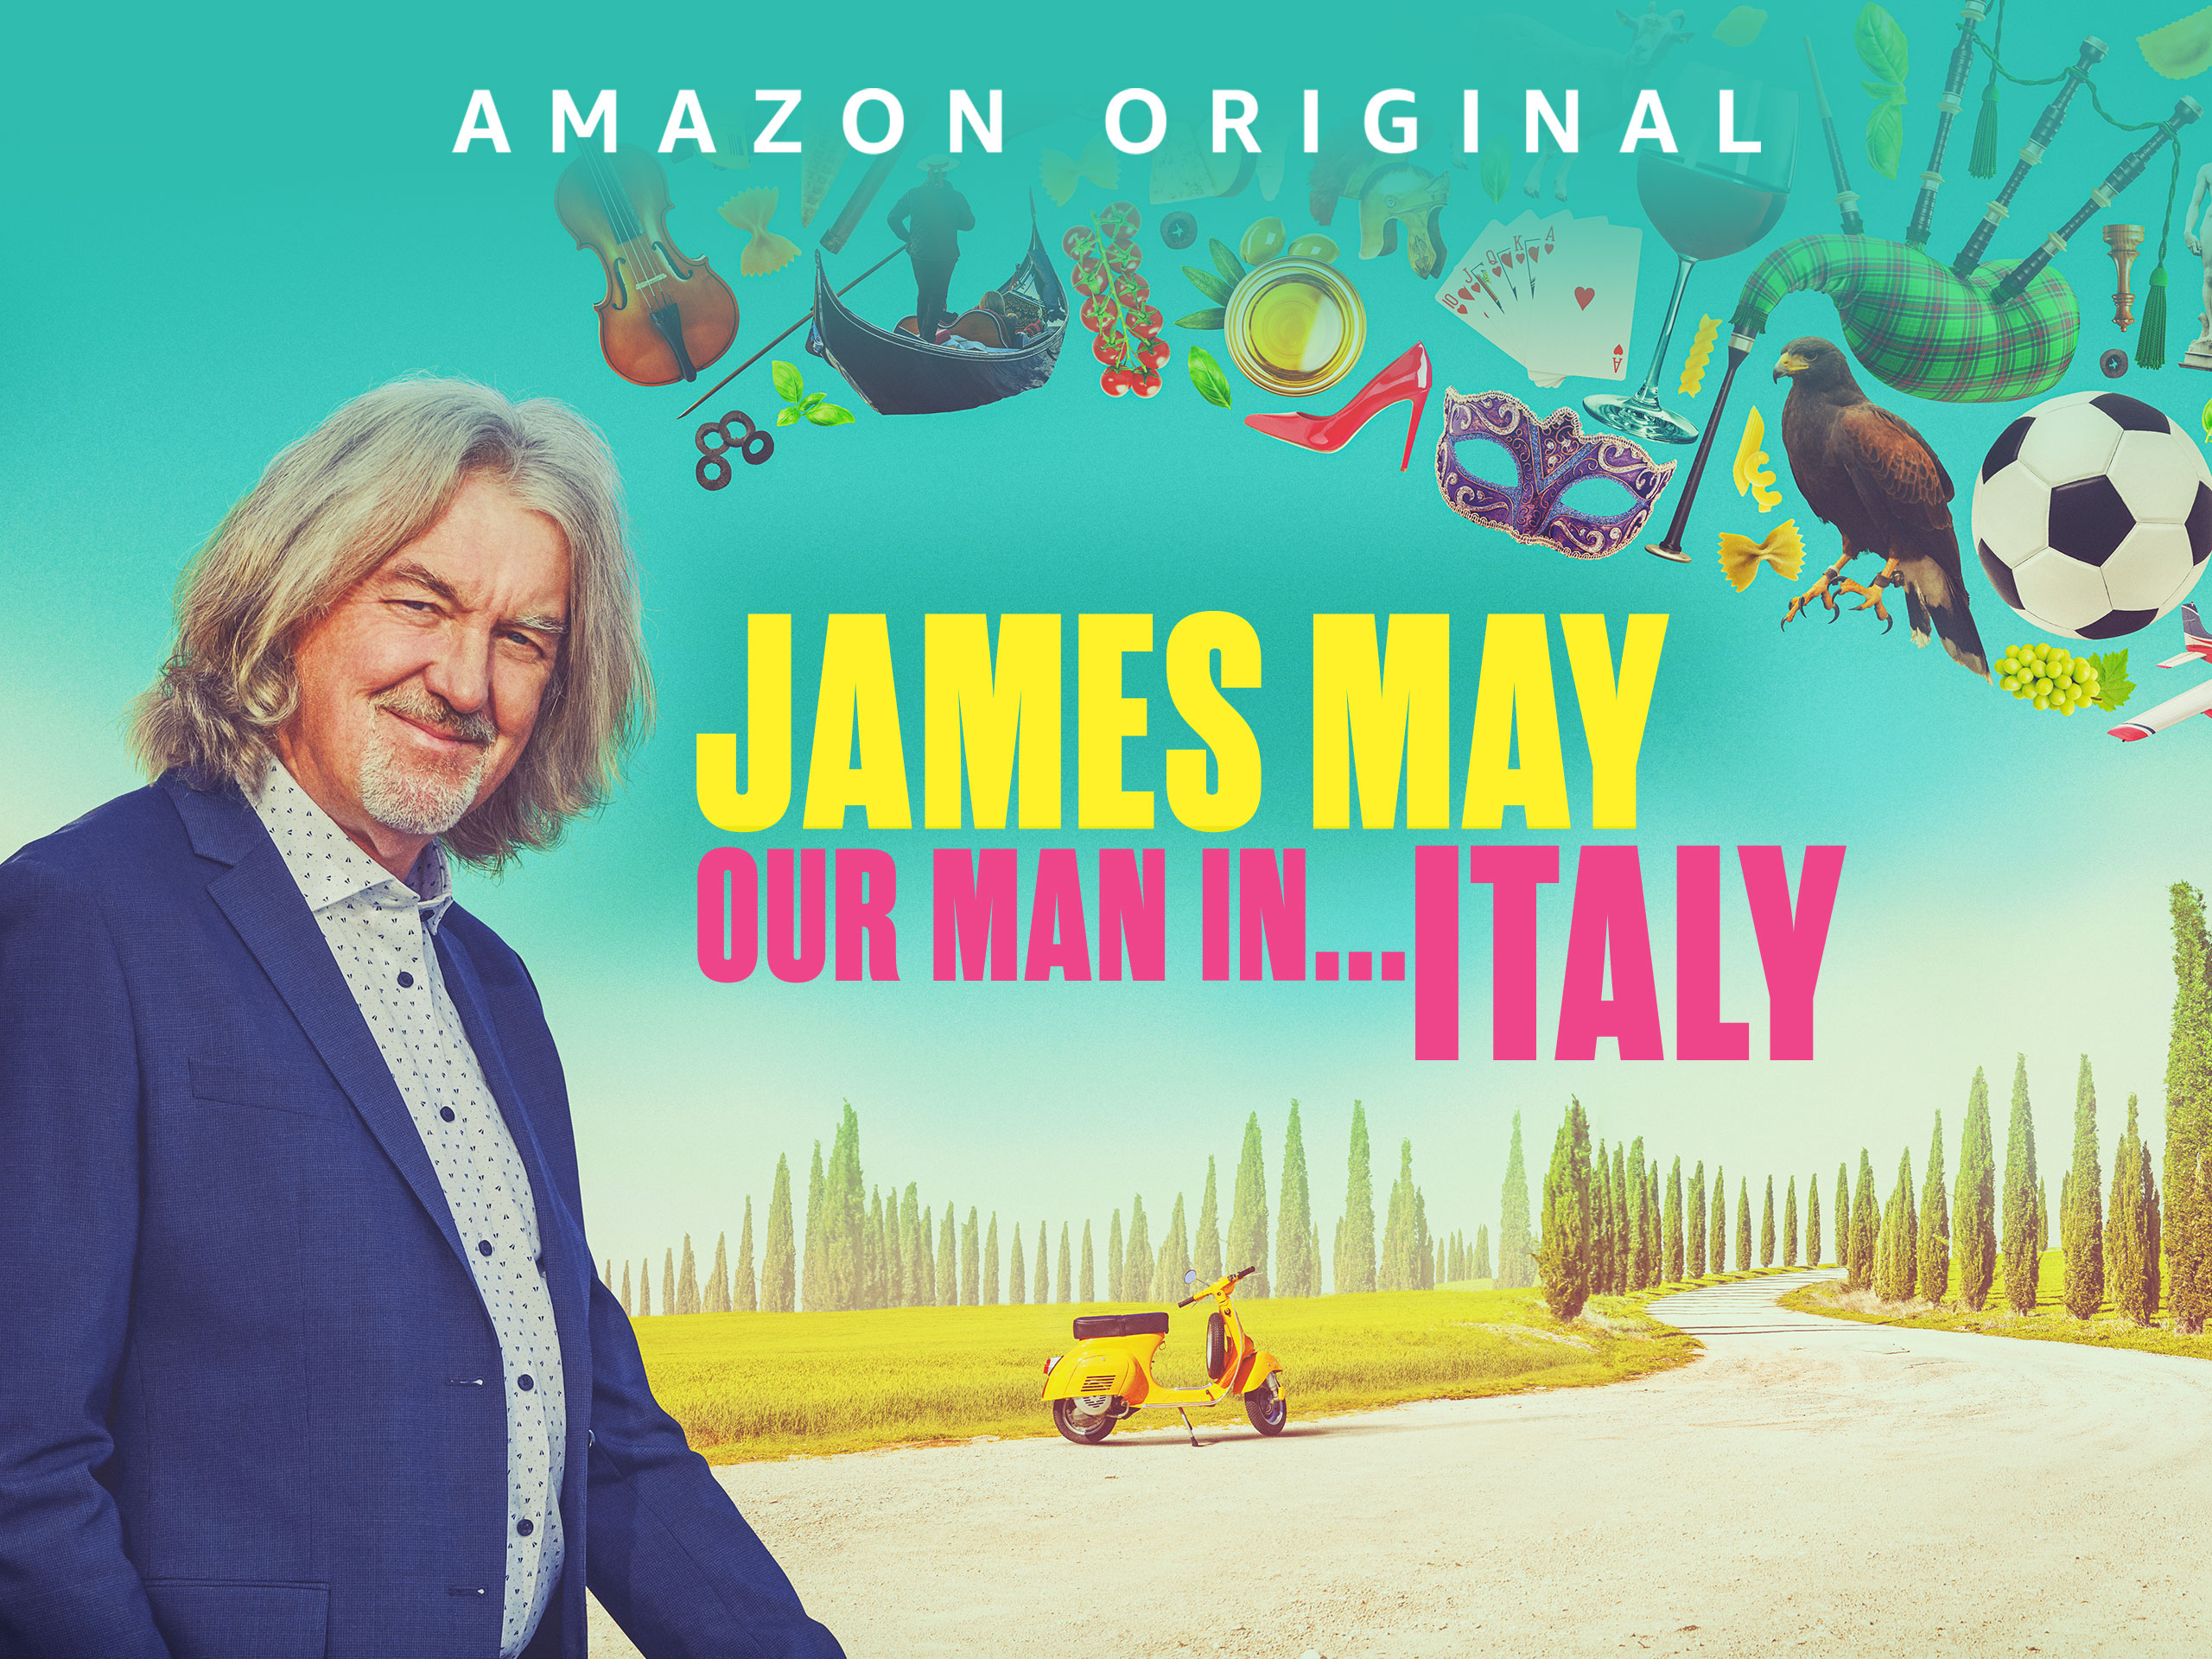 How to Watch James May Our Man in... Season 2 on Prime Video